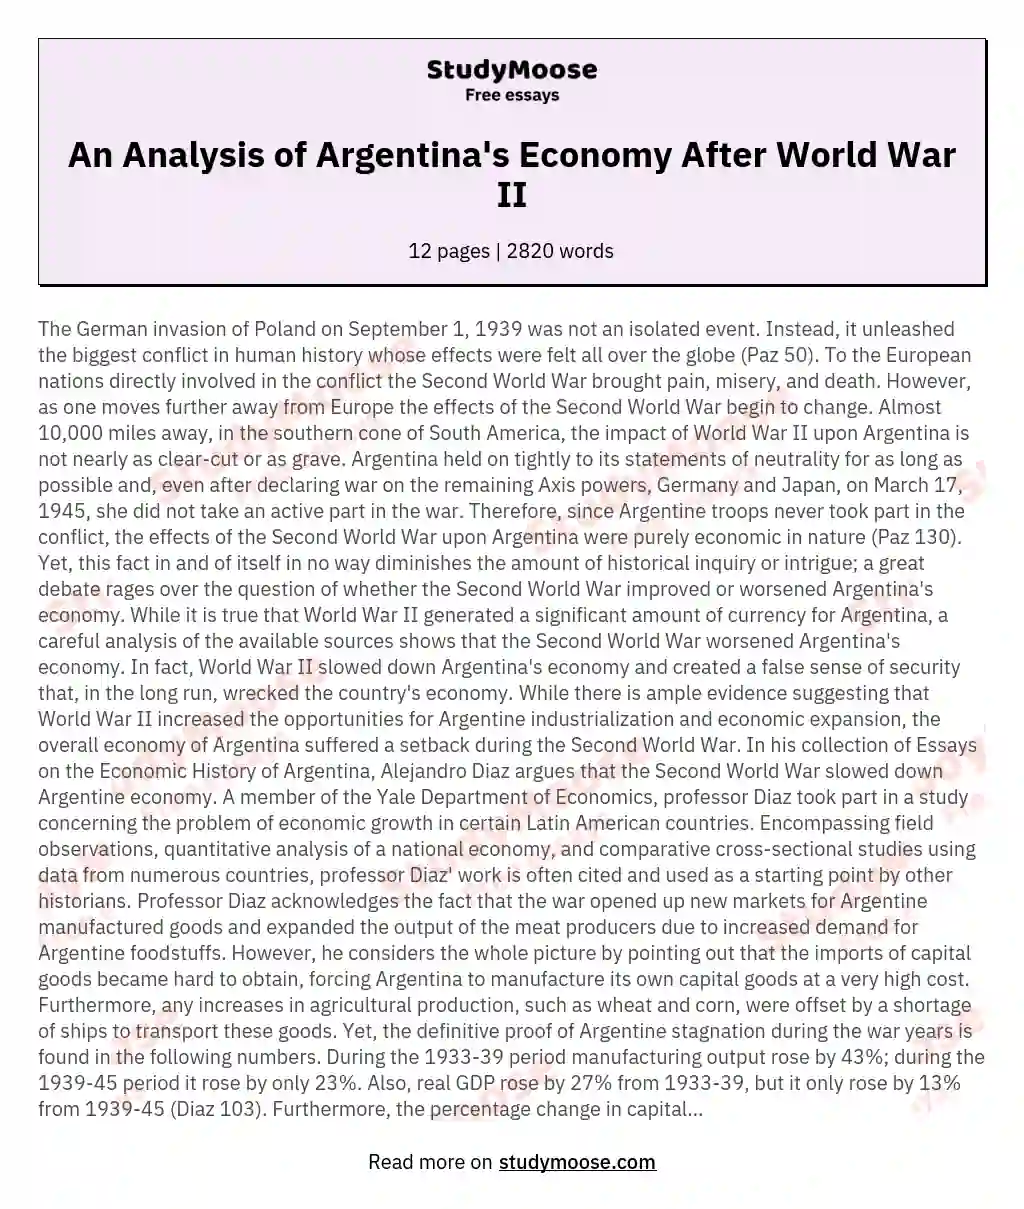 An Analysis of Argentina's Economy After World War II essay